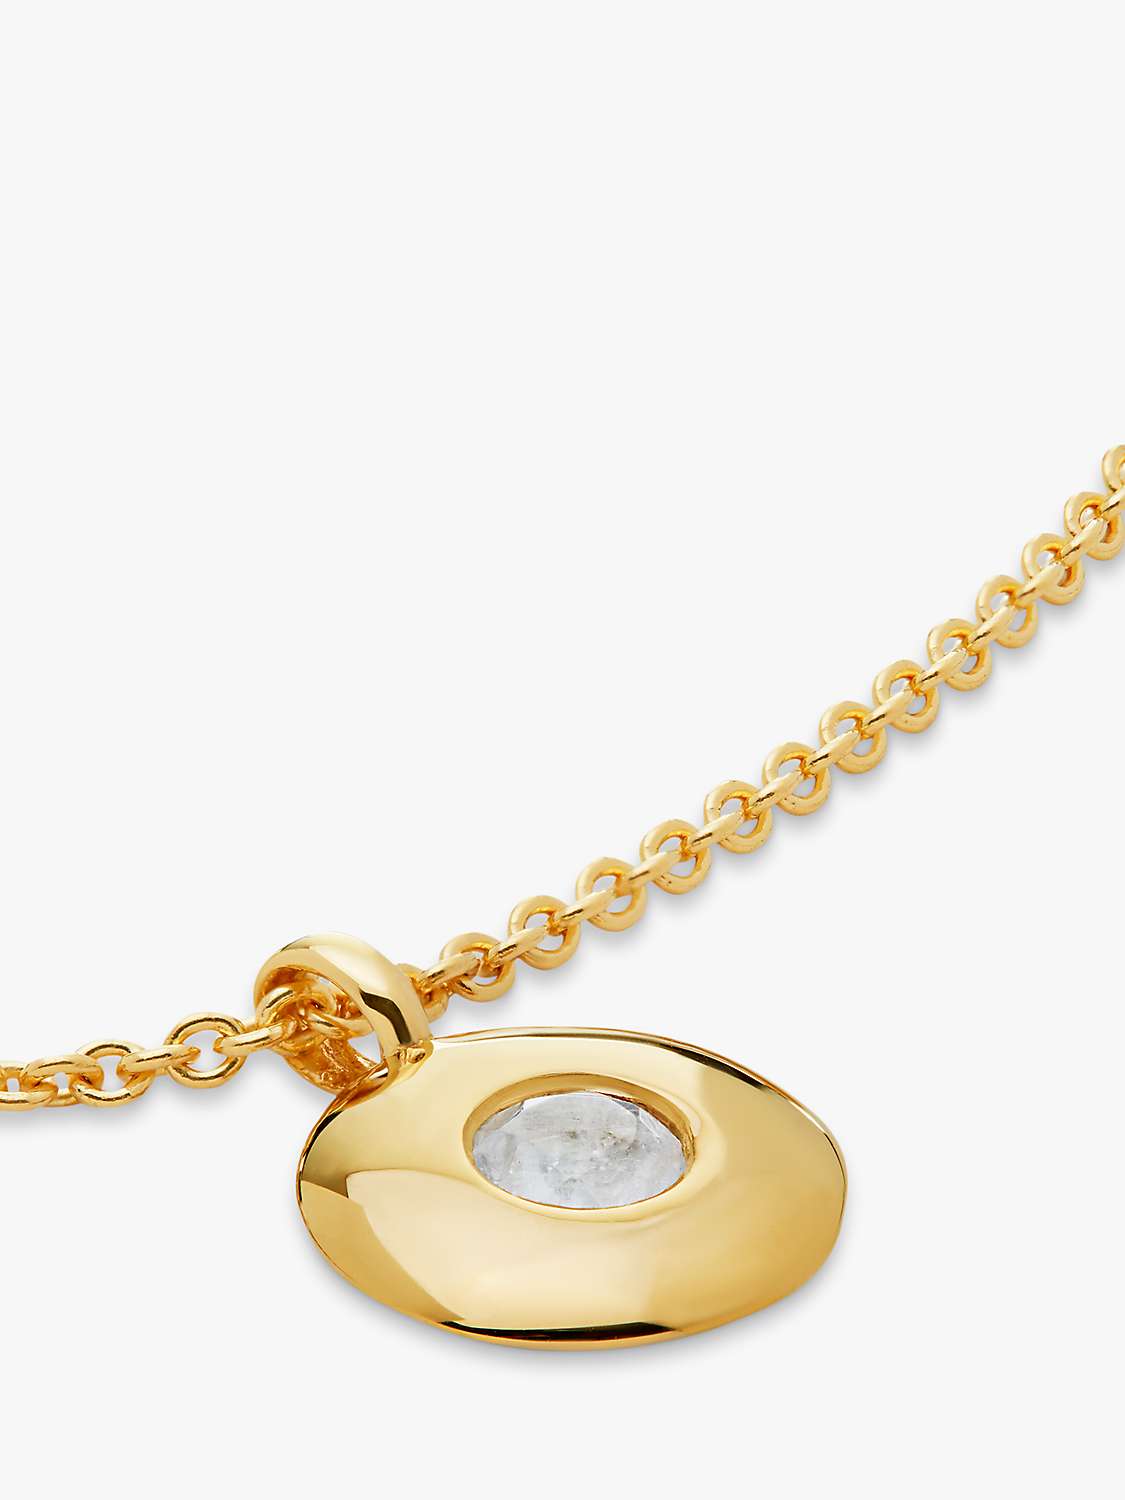 Buy Monica Vinader Personalisable Round Birthstone Pendant Necklace Online at johnlewis.com